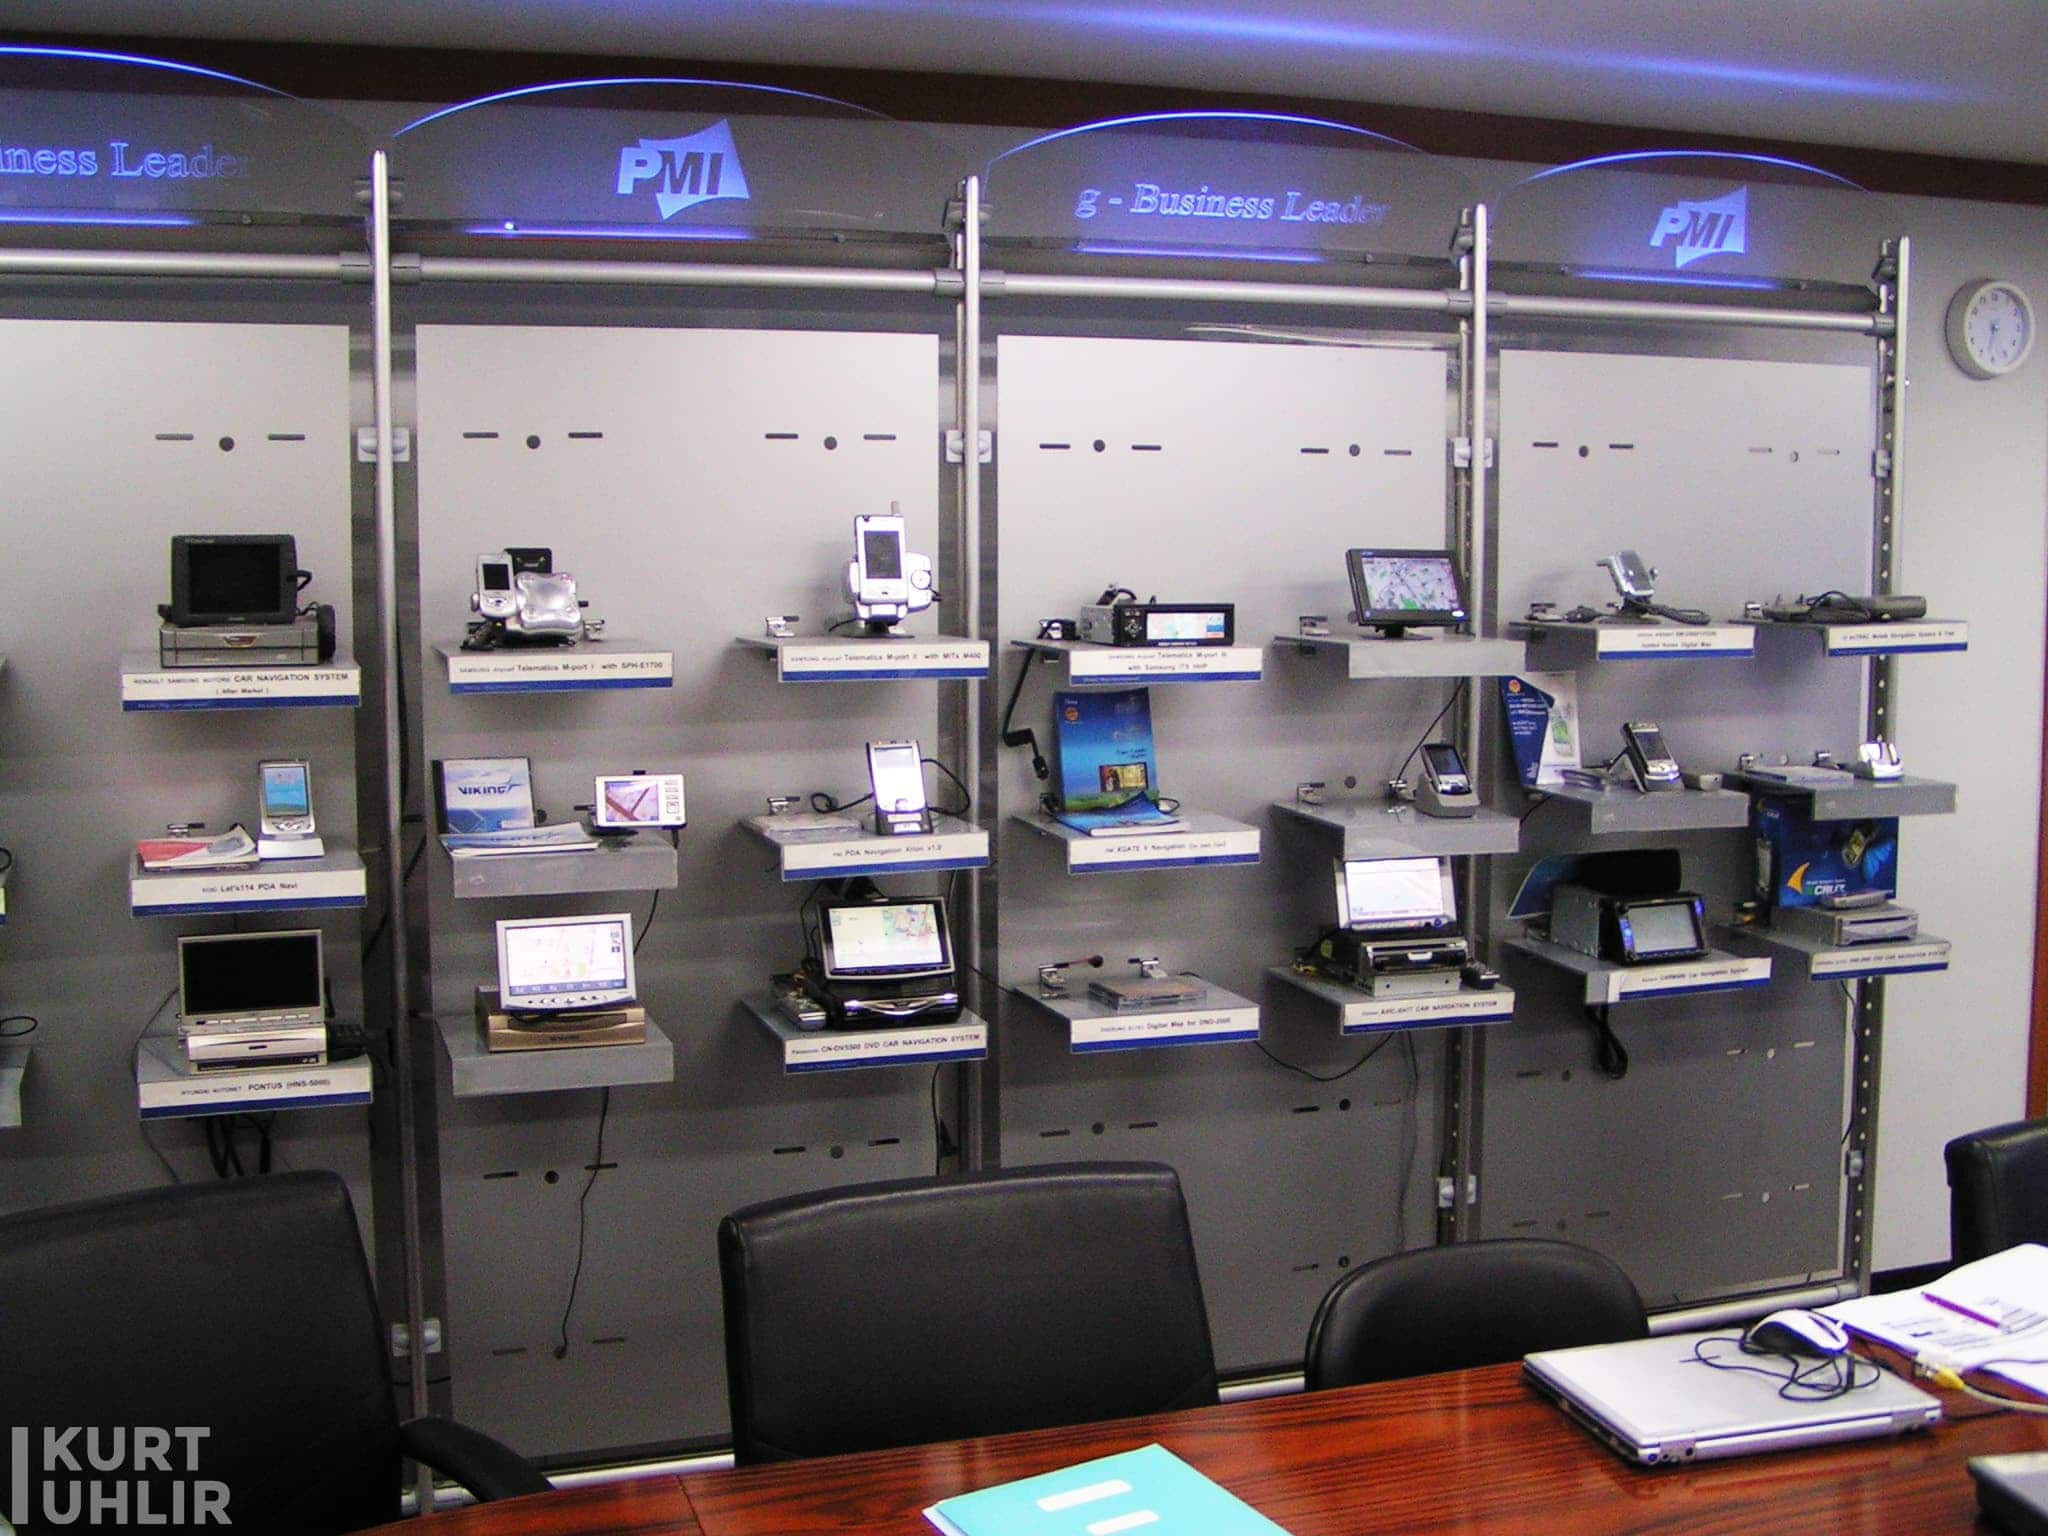 In July 2005, Navteq acquired Picture Map International (PMI), a South Korean digital map company, for about $30 million. It's great to see a wall of all of the devices using PMI maps in South Korea.